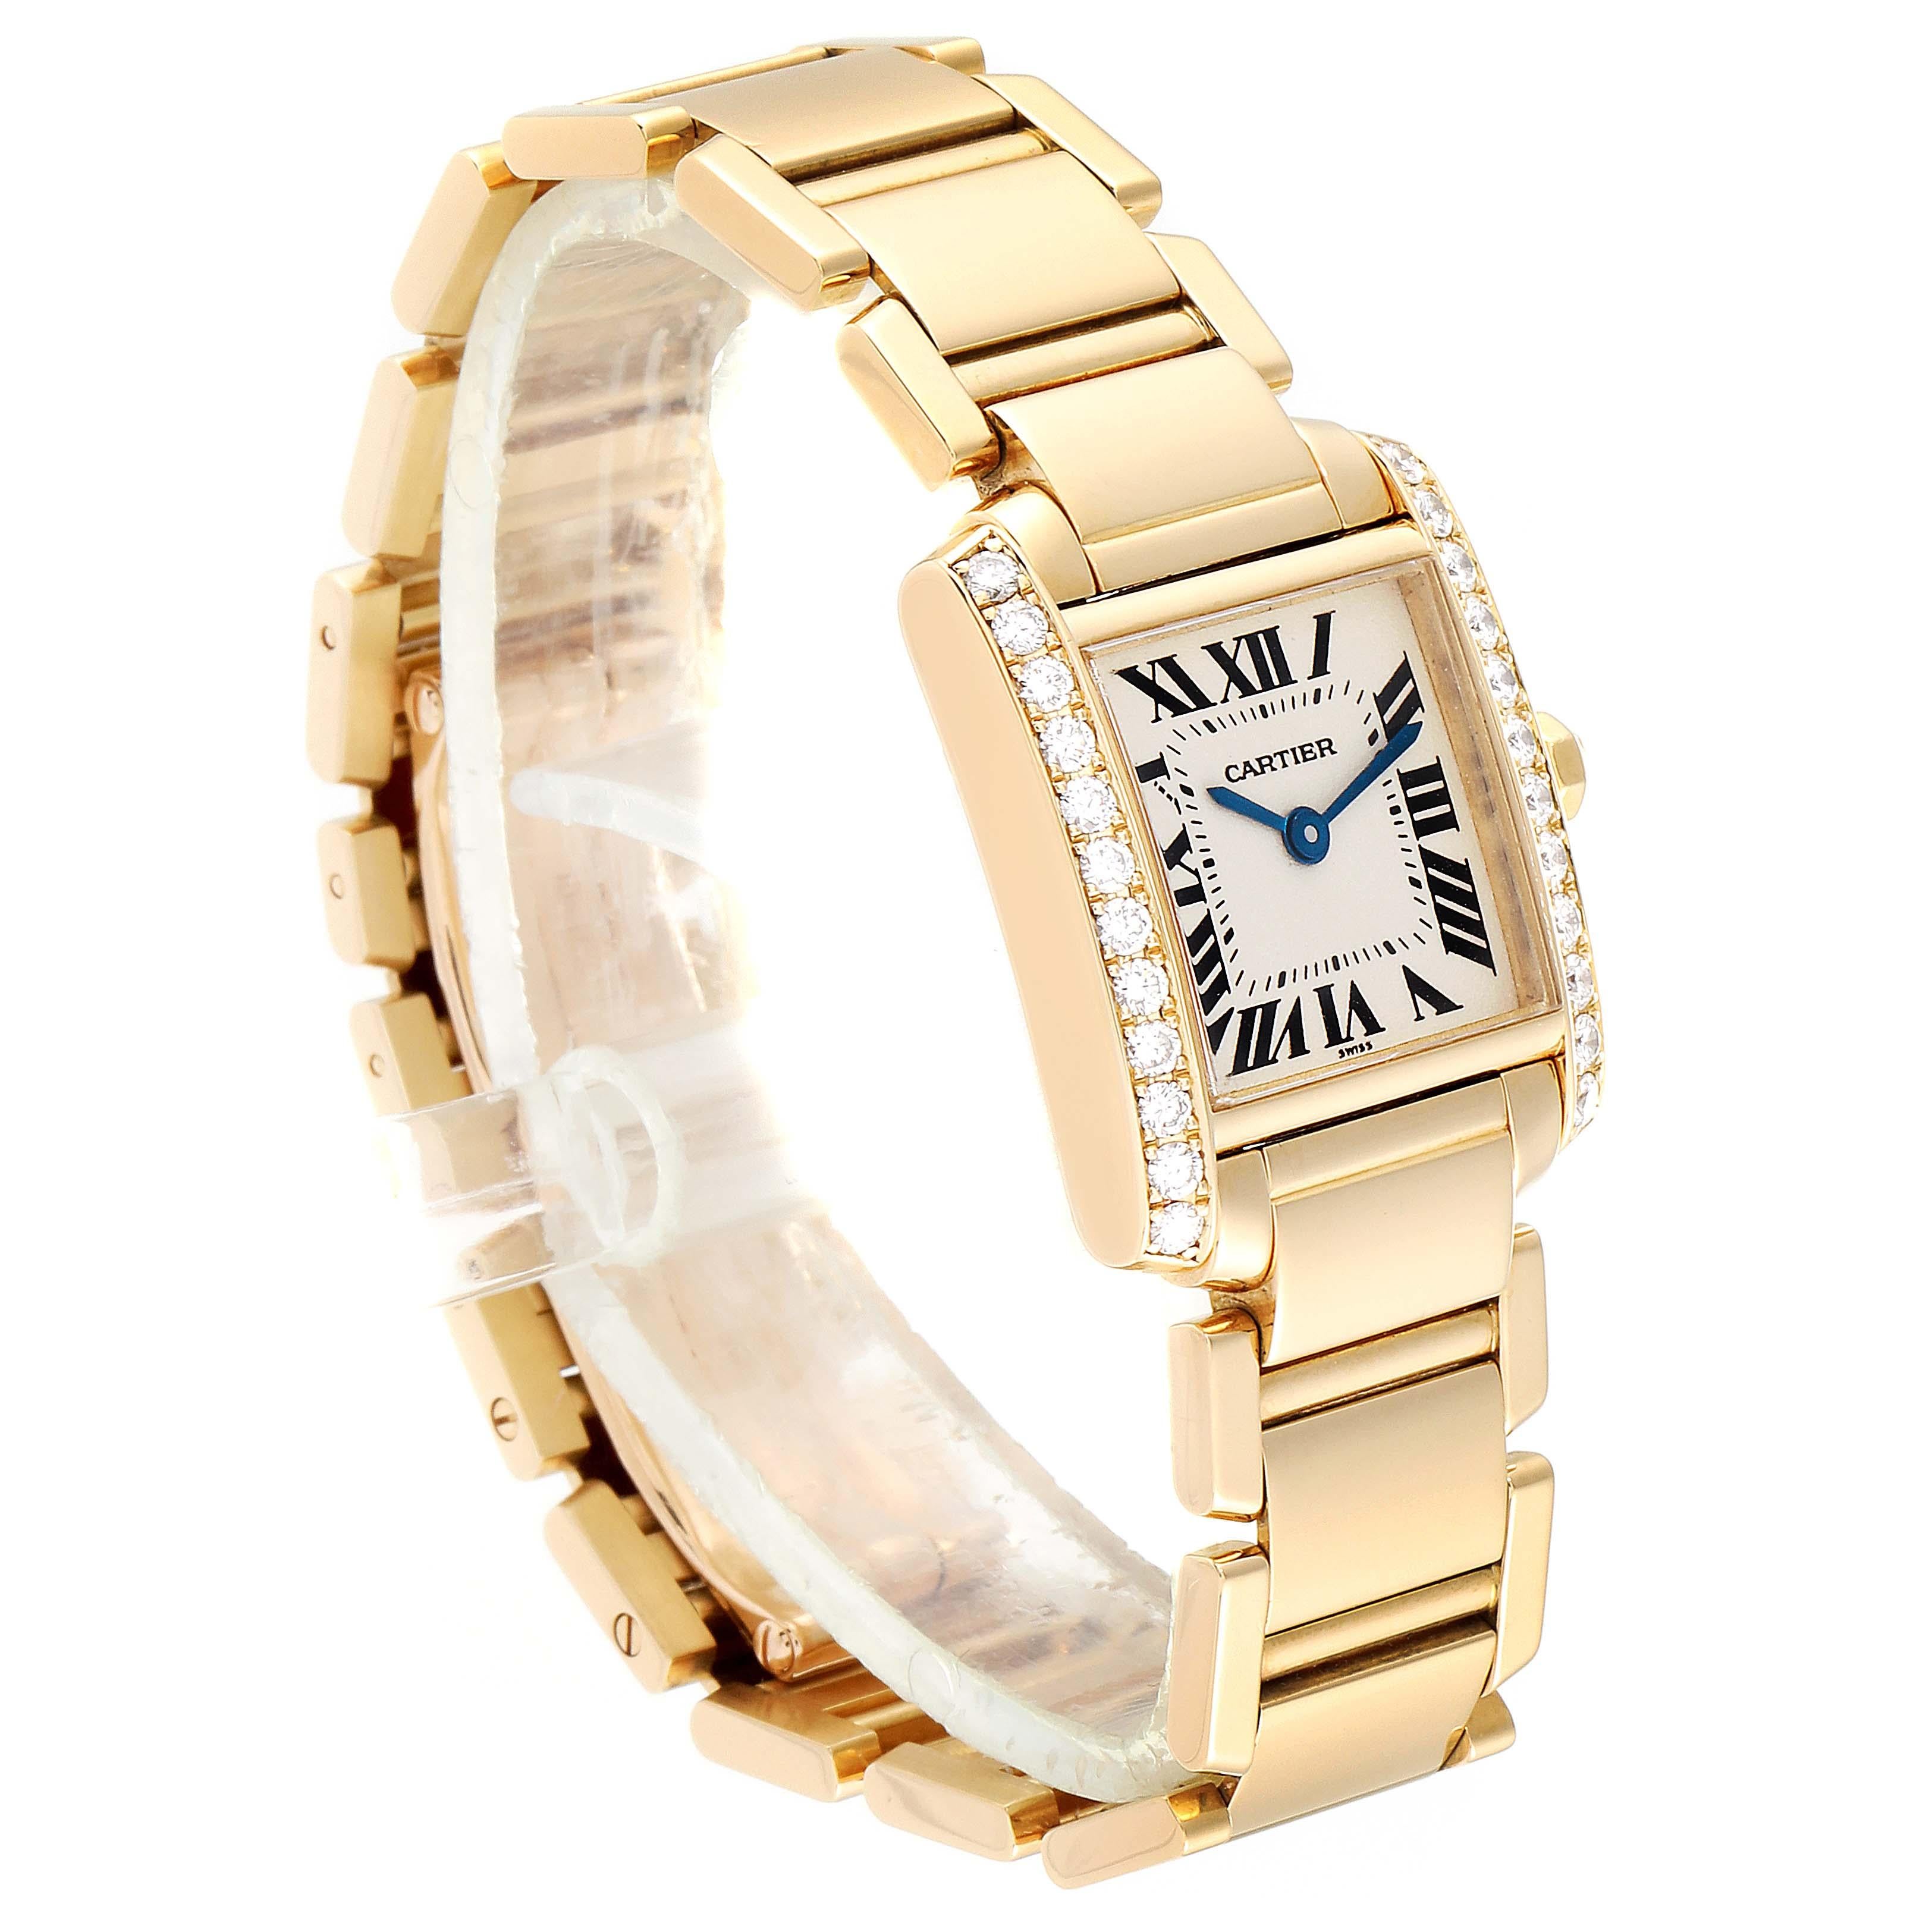 Cartier Tank Francaise 18 Karat Yellow Gold Diamond Ladies Watch WE1001R8 In Excellent Condition For Sale In Atlanta, GA